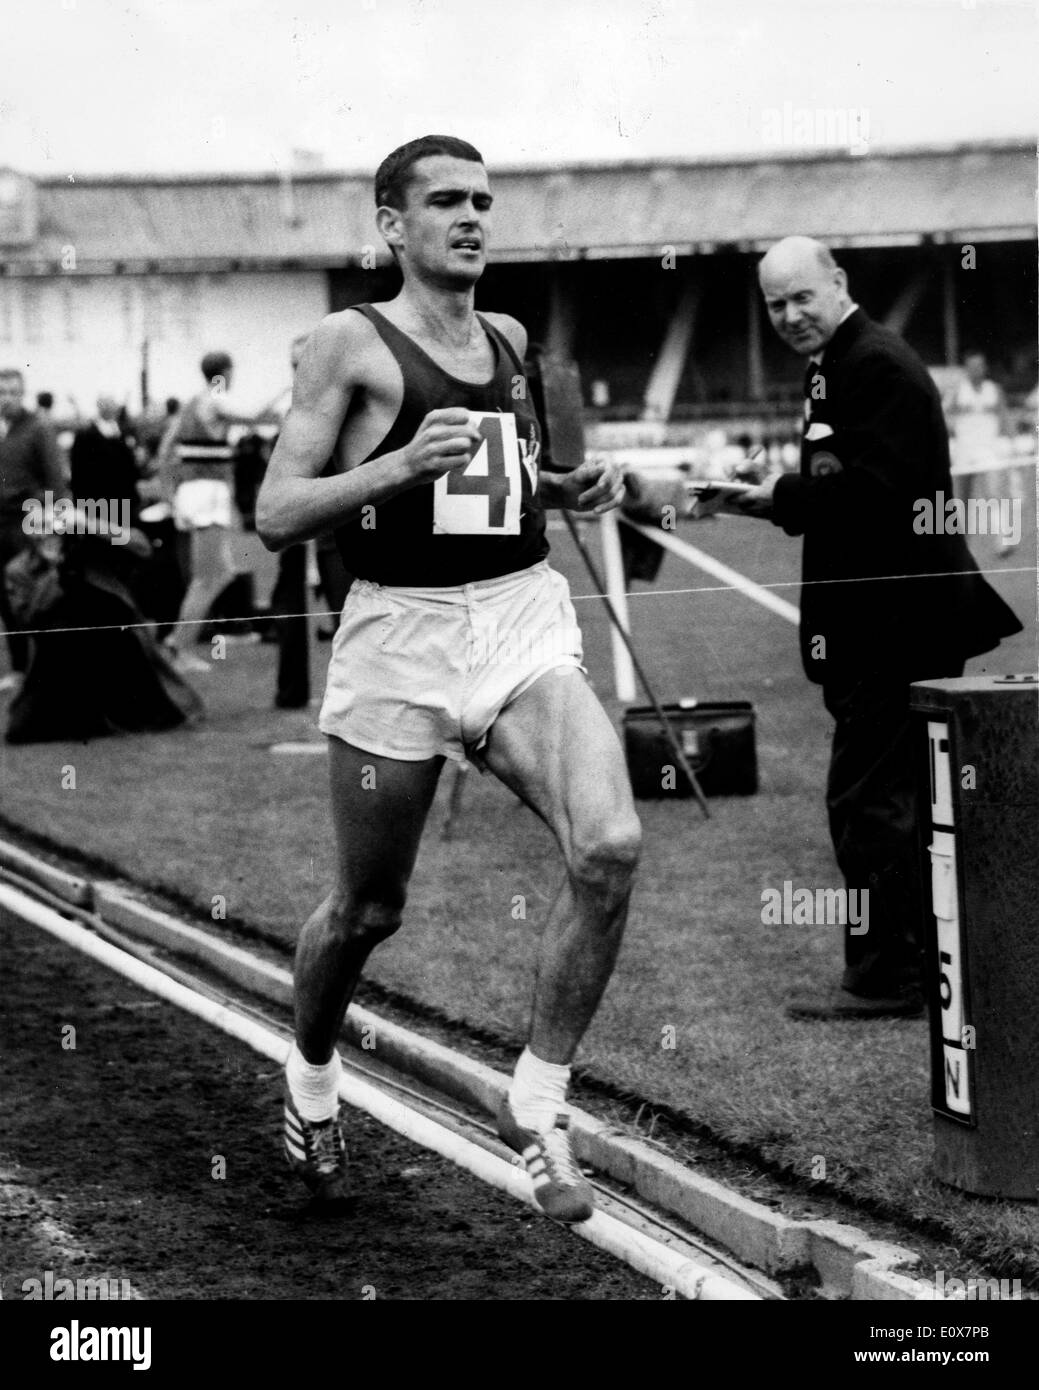 RON CLARKE at the finish line setting a world record running three miles in 12 minutes, 52.4 seconds. Stock Photo